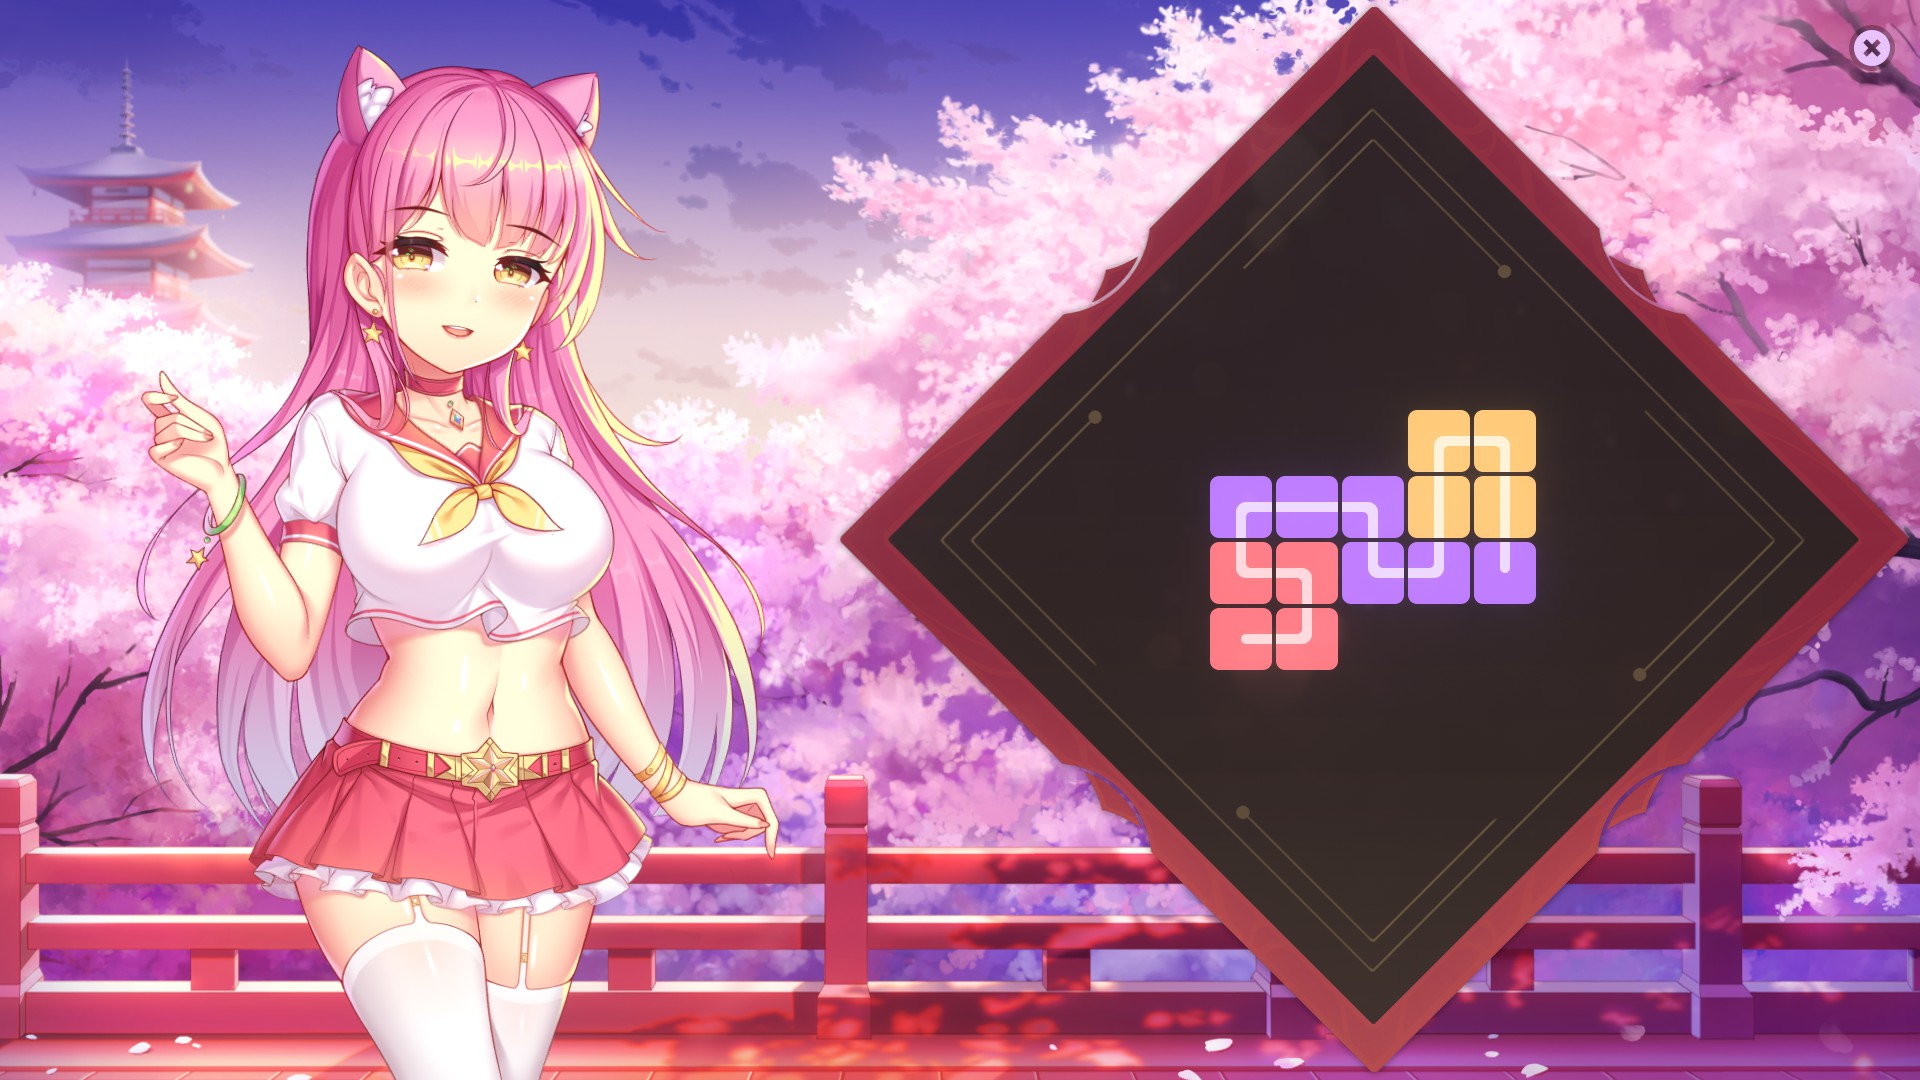 Sakura Hime 2 Achievement Guide - Images of completed levels - DA76A02